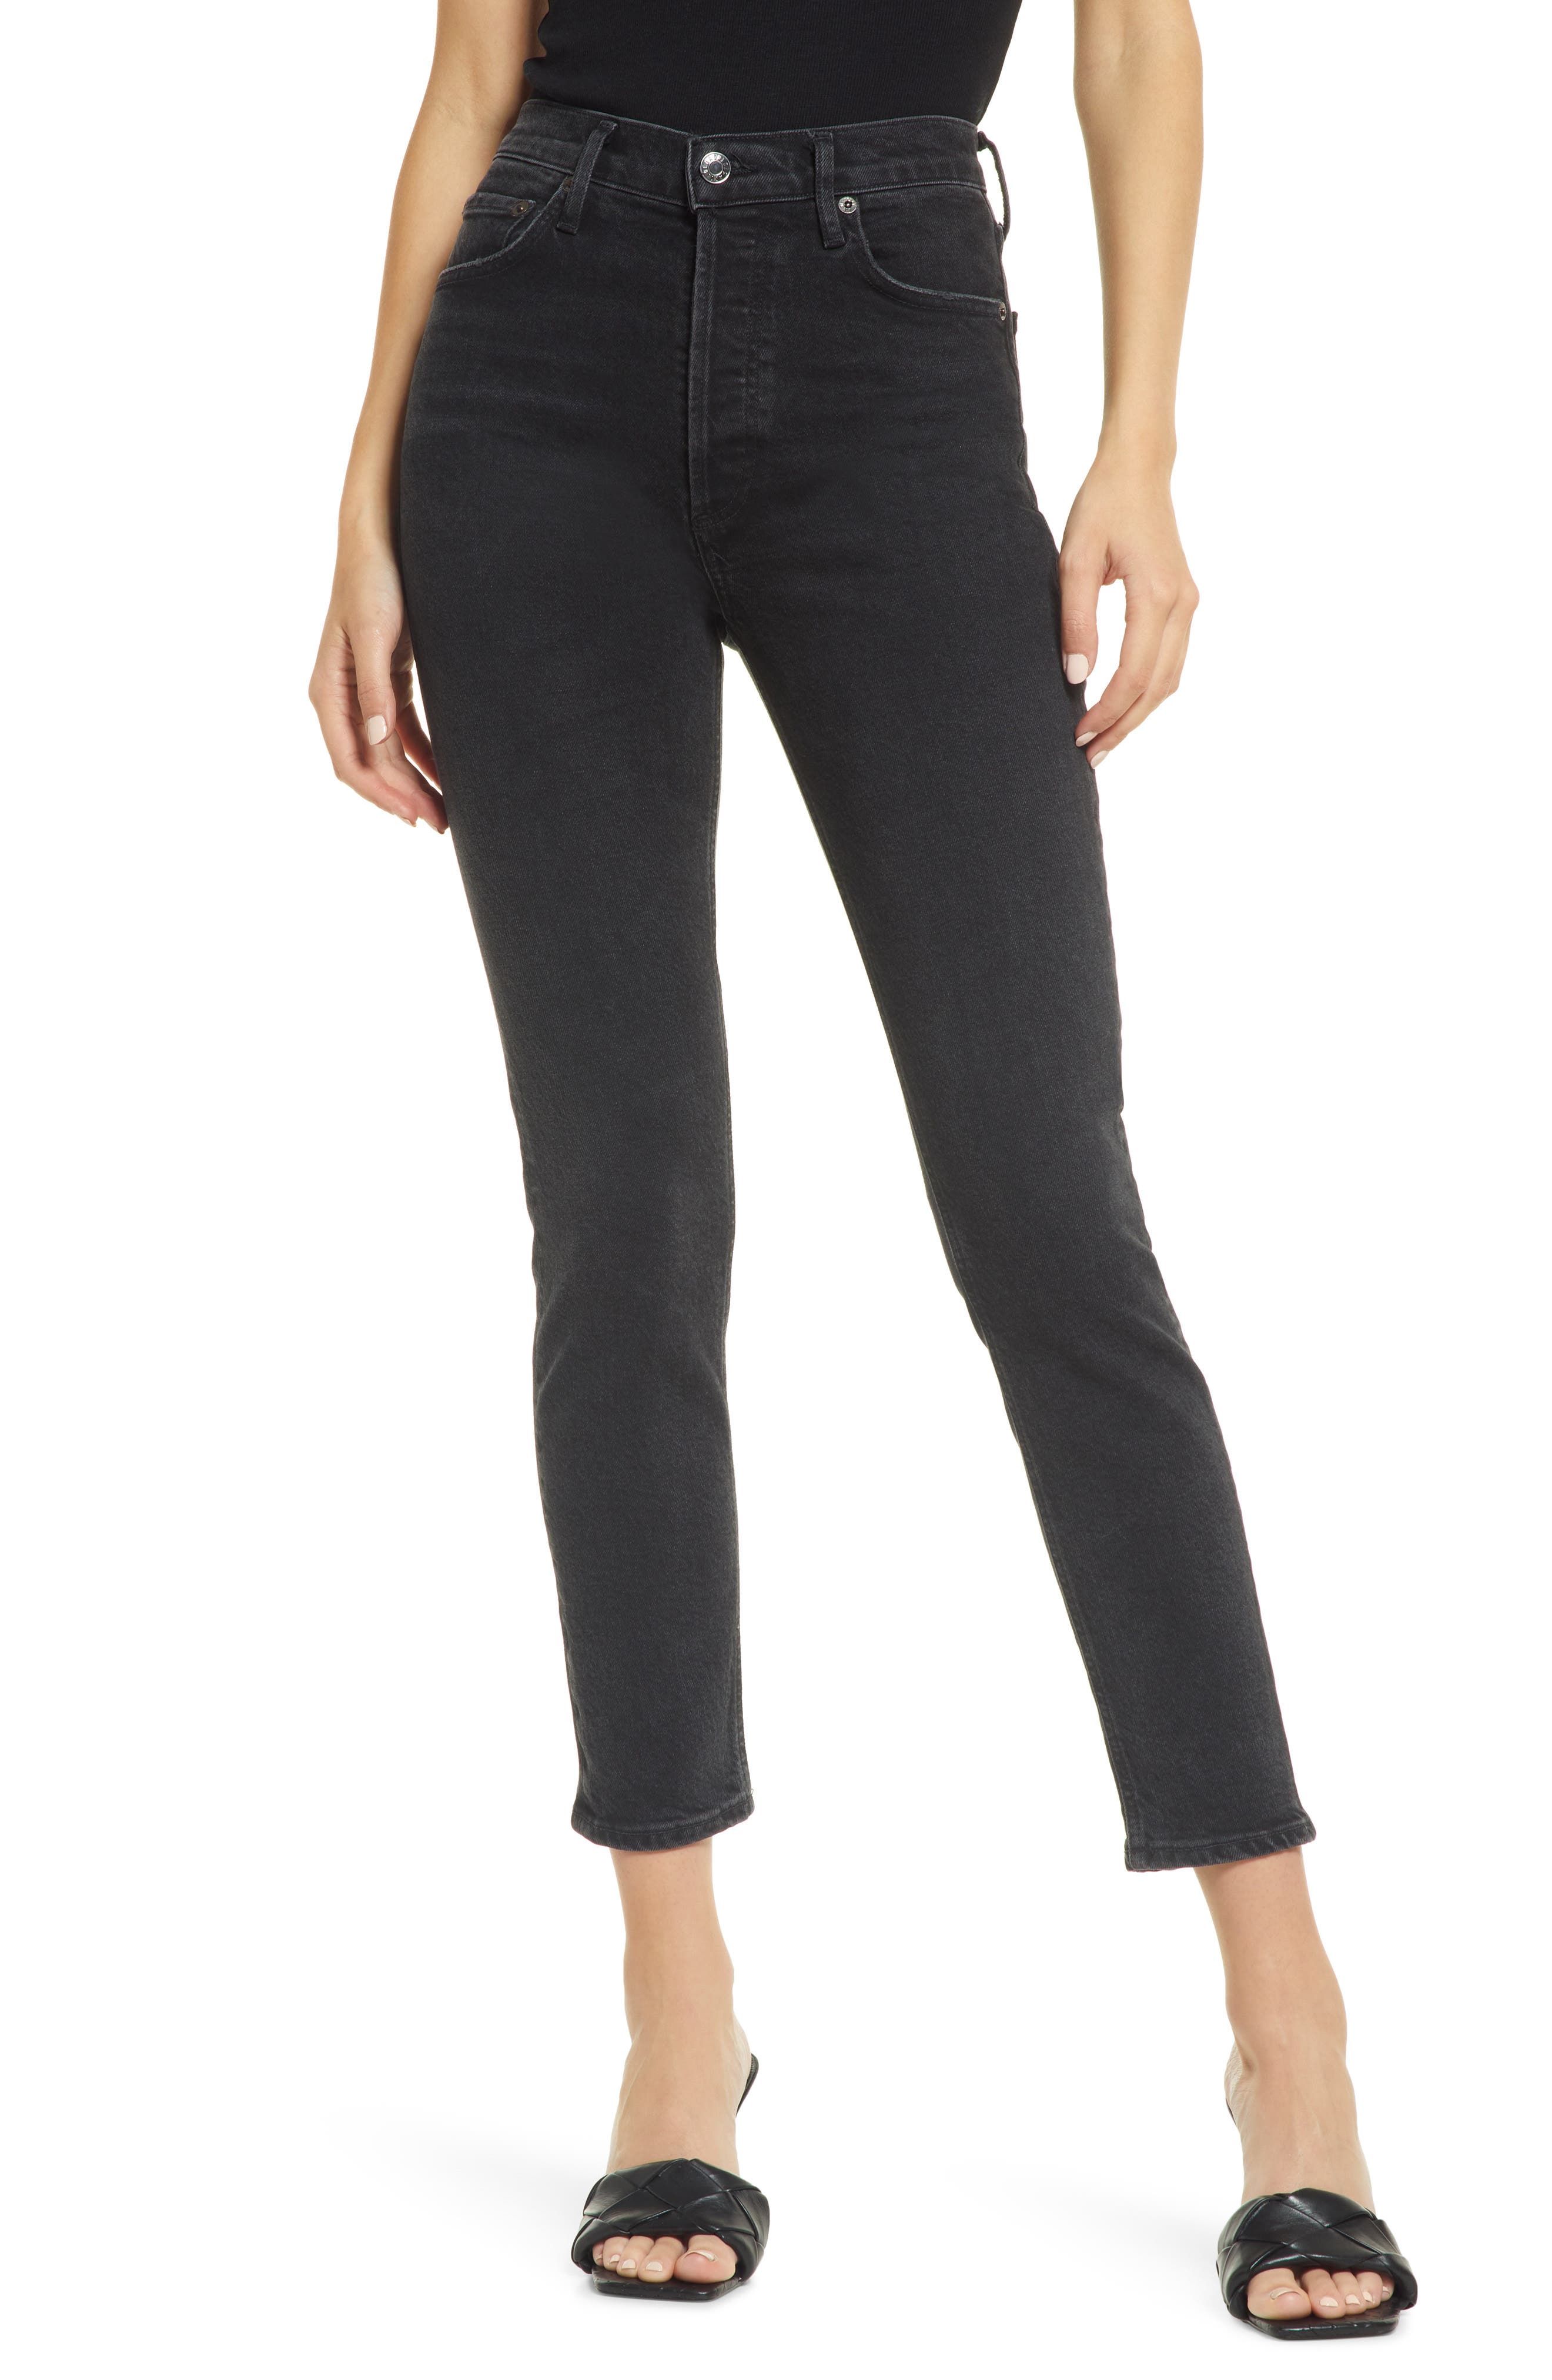 AGOLDE Nico High Waist Ankle Slim Fit Jeans in Compilation at Nordstrom, Size 26